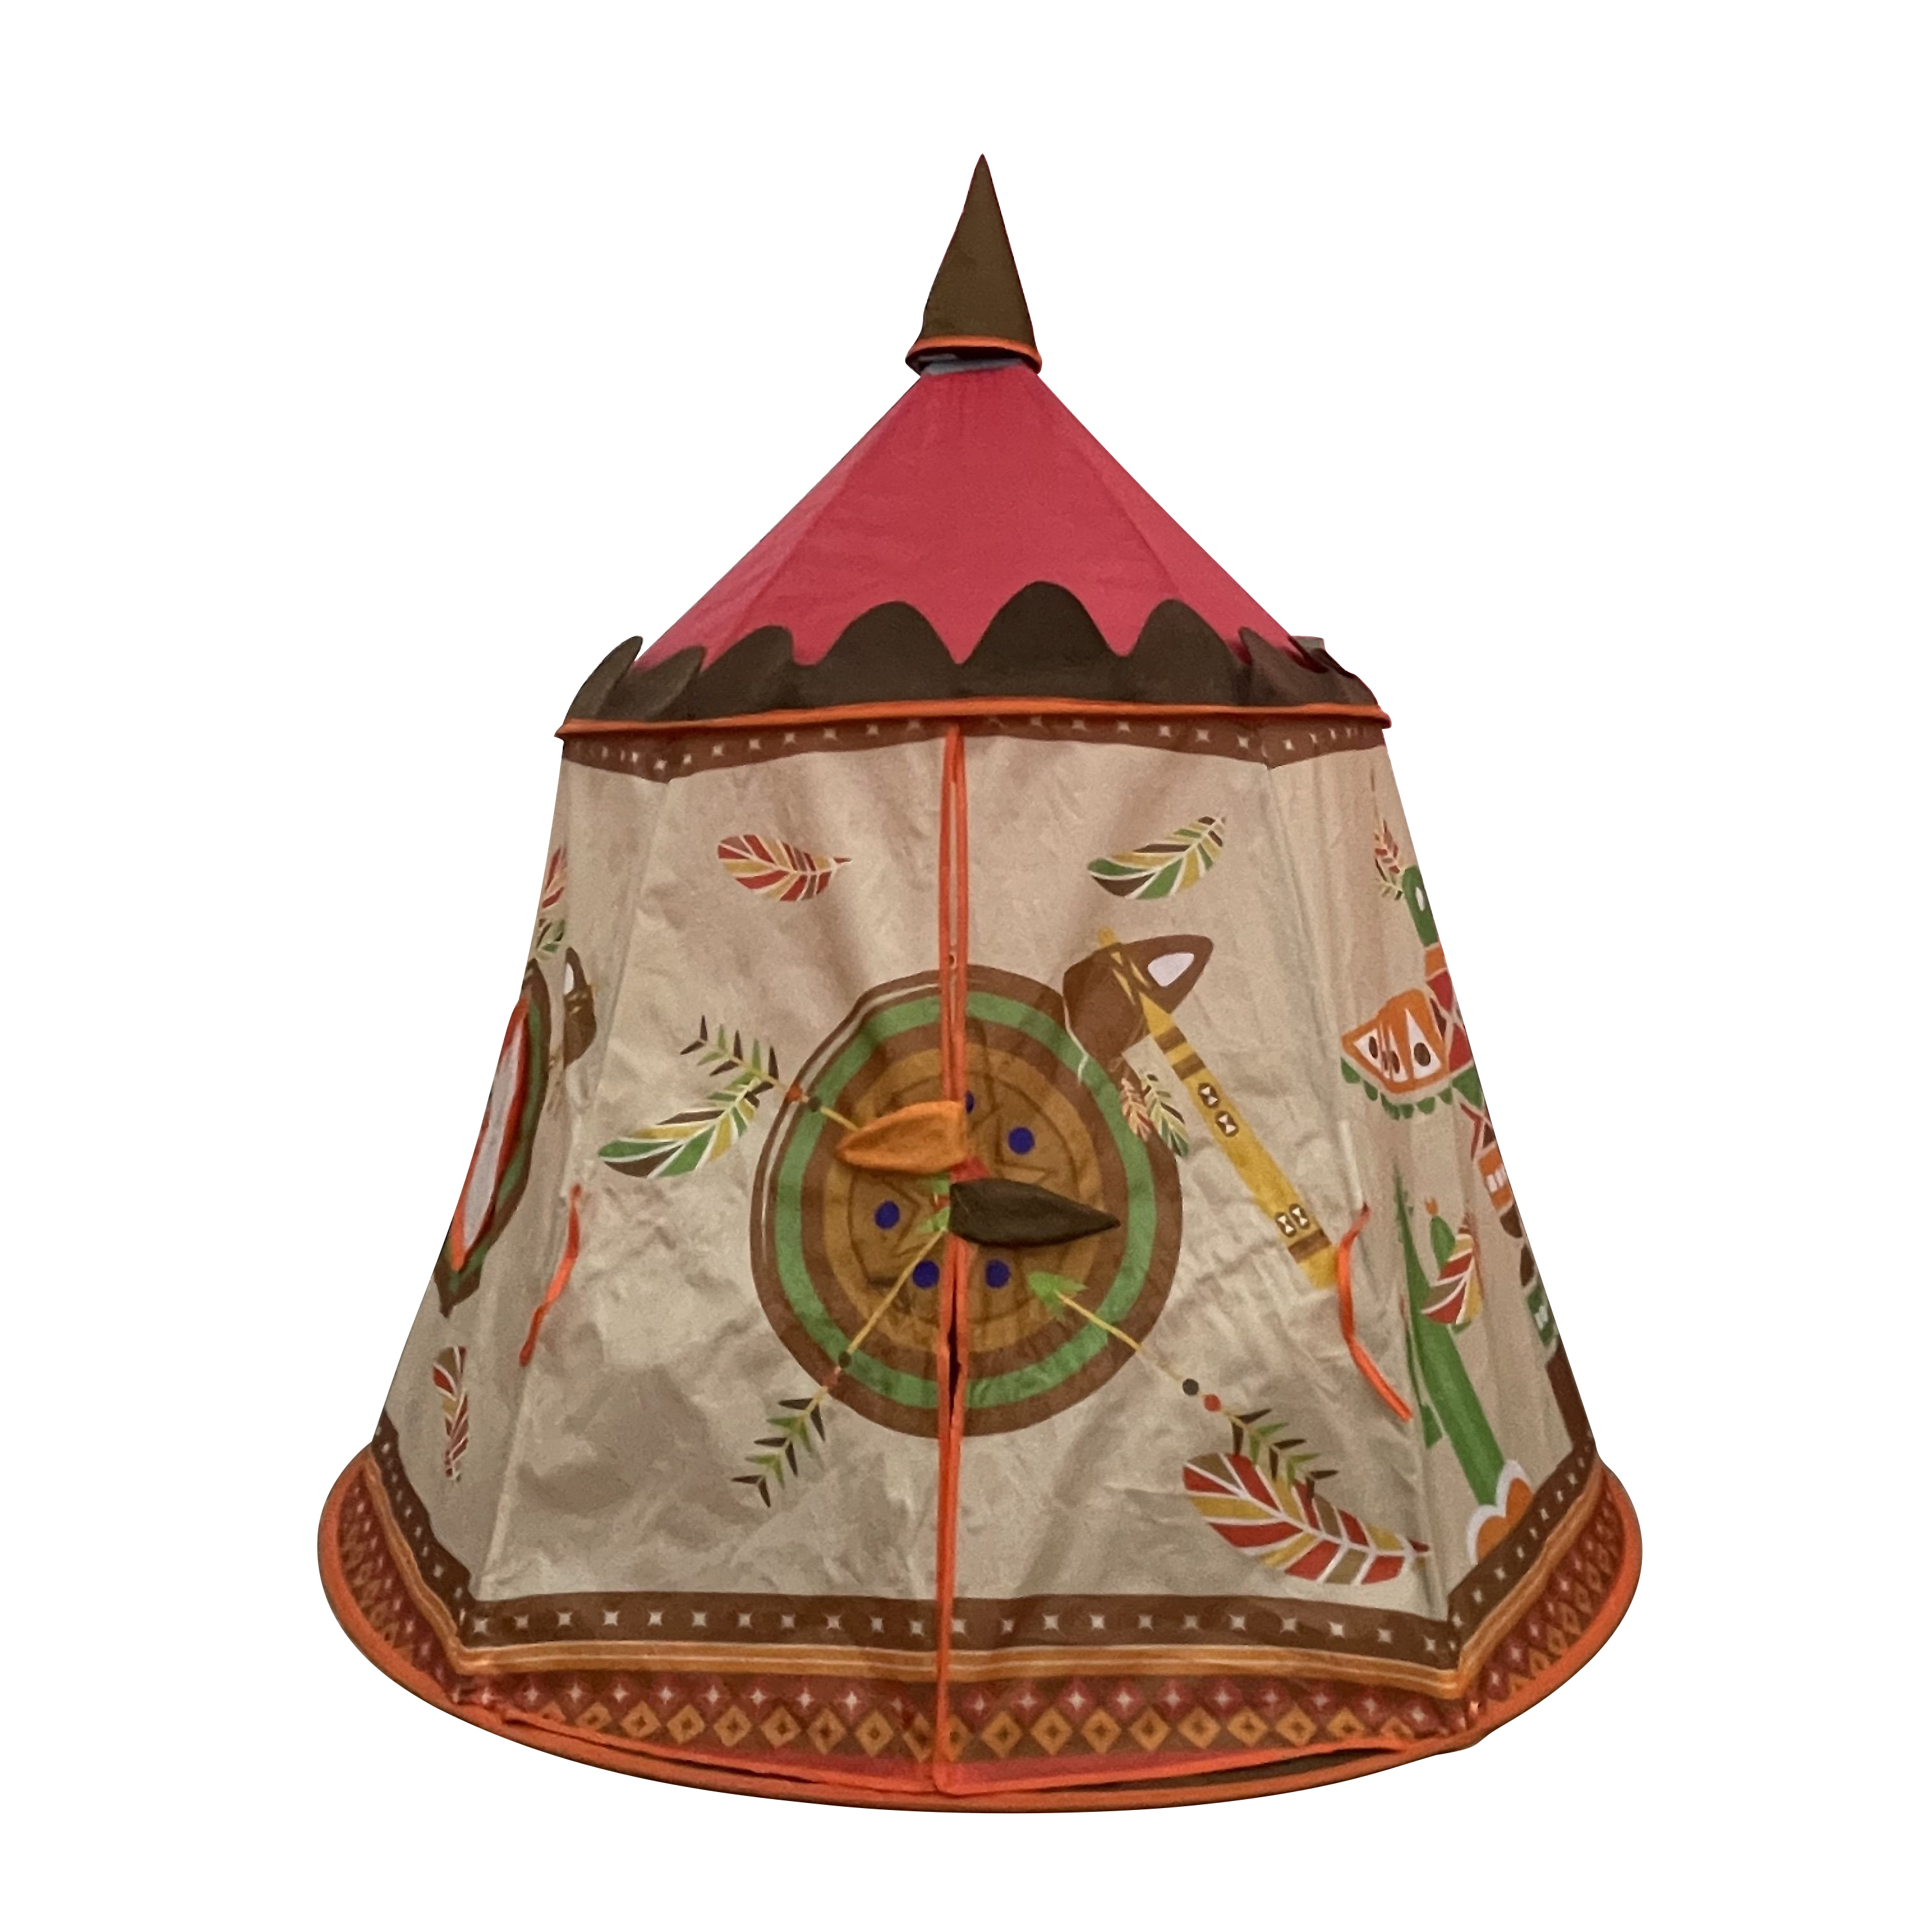 Indian Castle Princess Castle Kids Tent Portable Teepee Toys Kids Play Tents